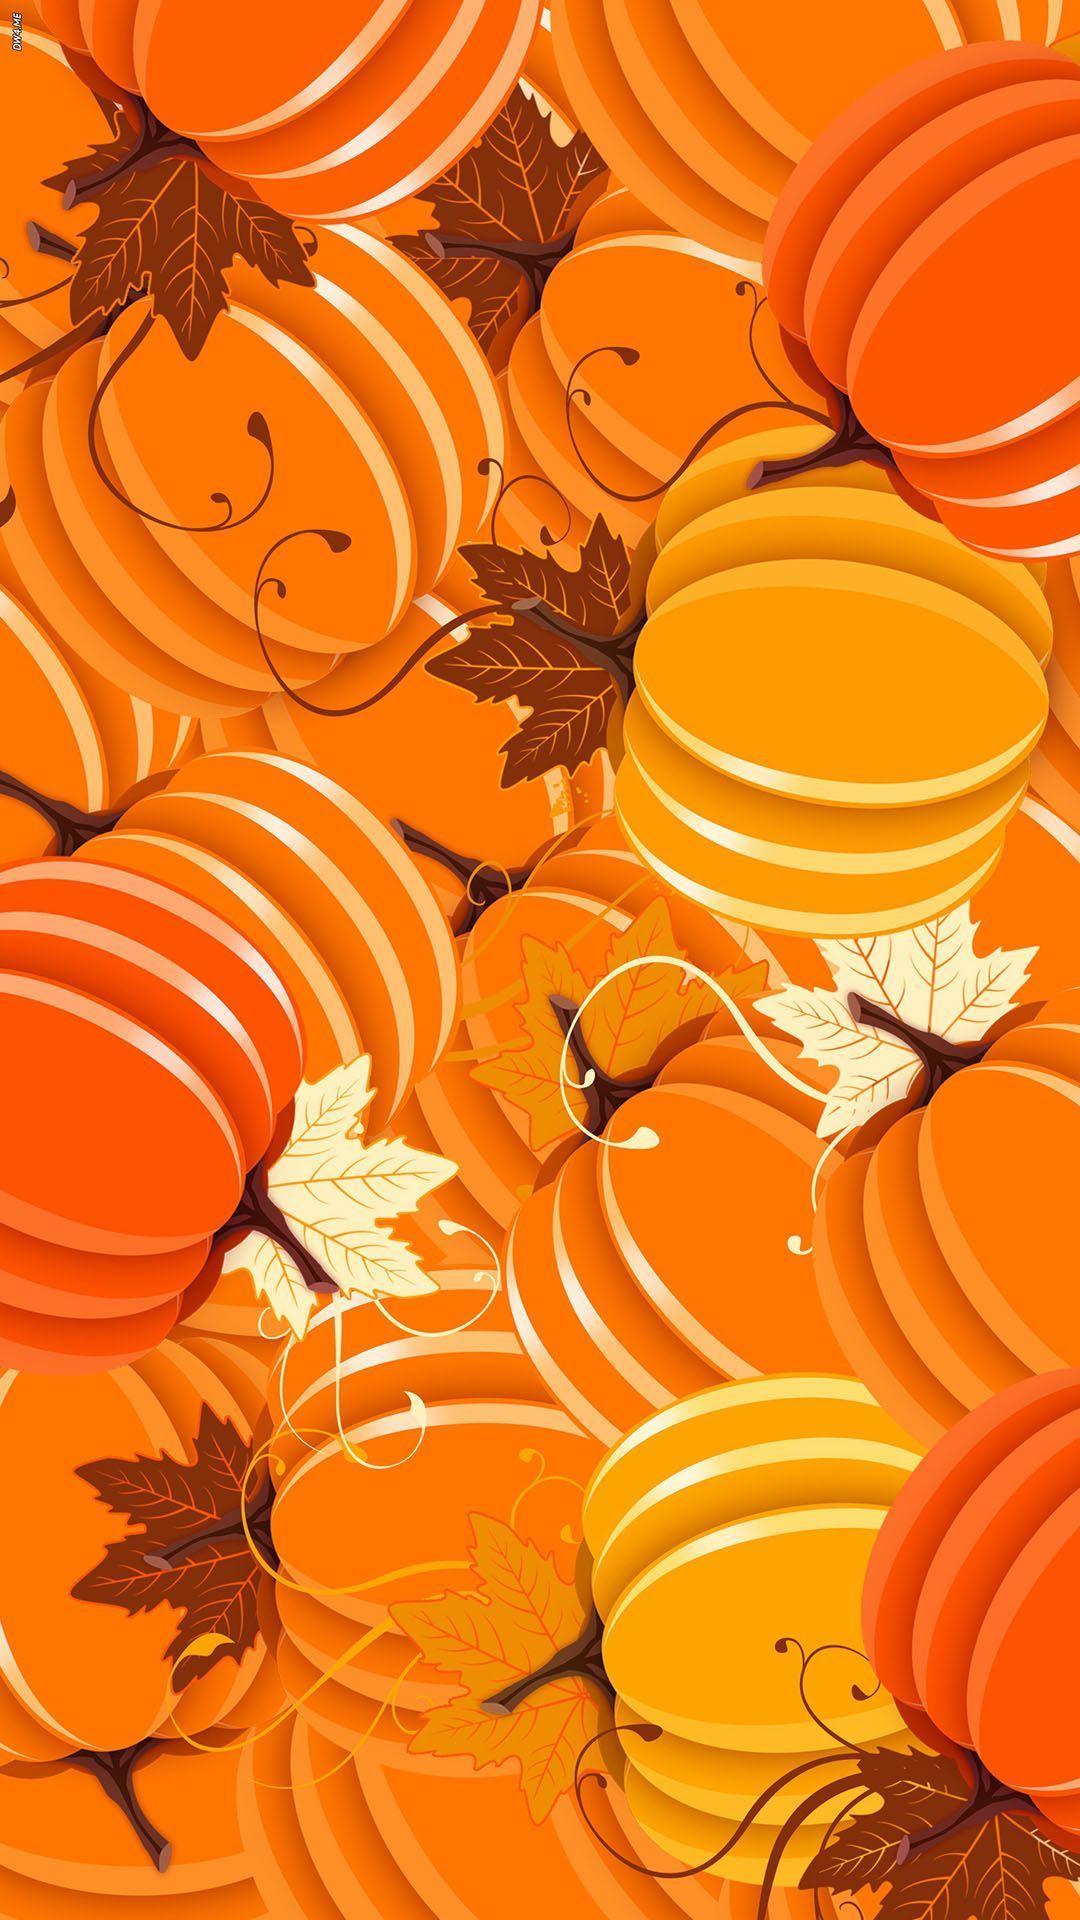 Girly Autumn Wallpapers - Wallpaper Cave